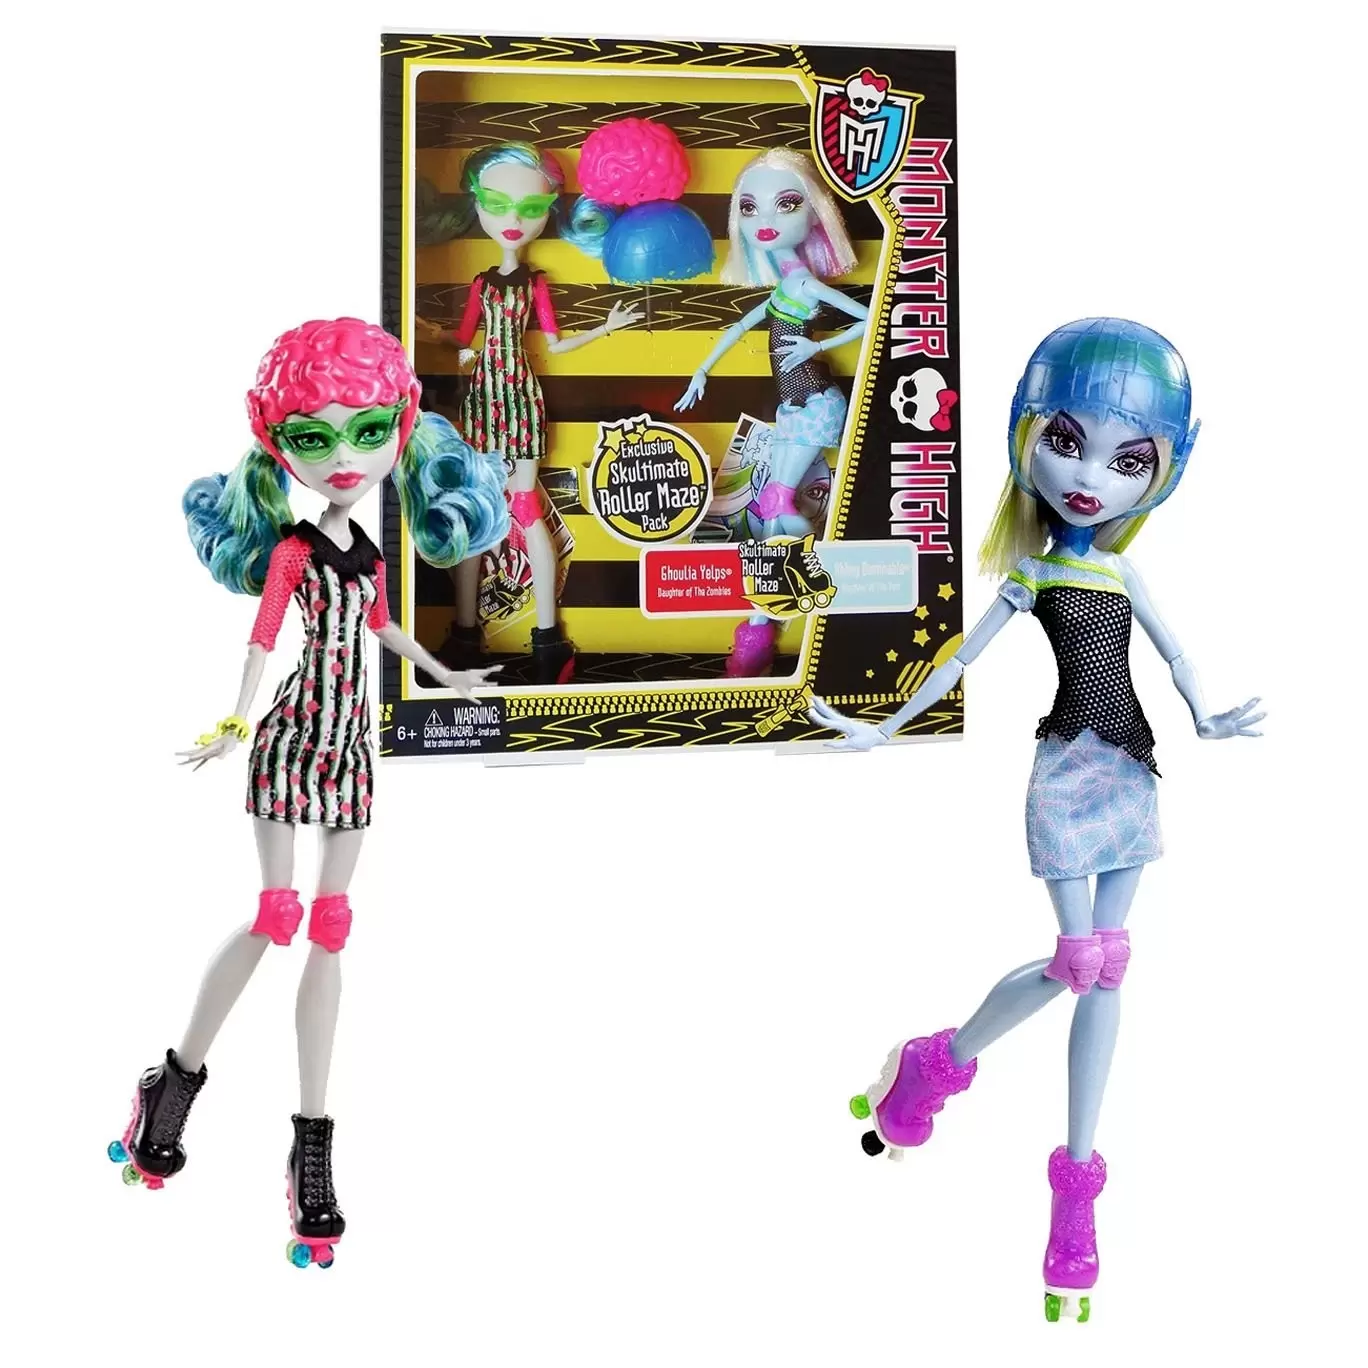 Abbey Bominable & Ghoulia Yelps (2-pack) - Skultimate Roller Maze